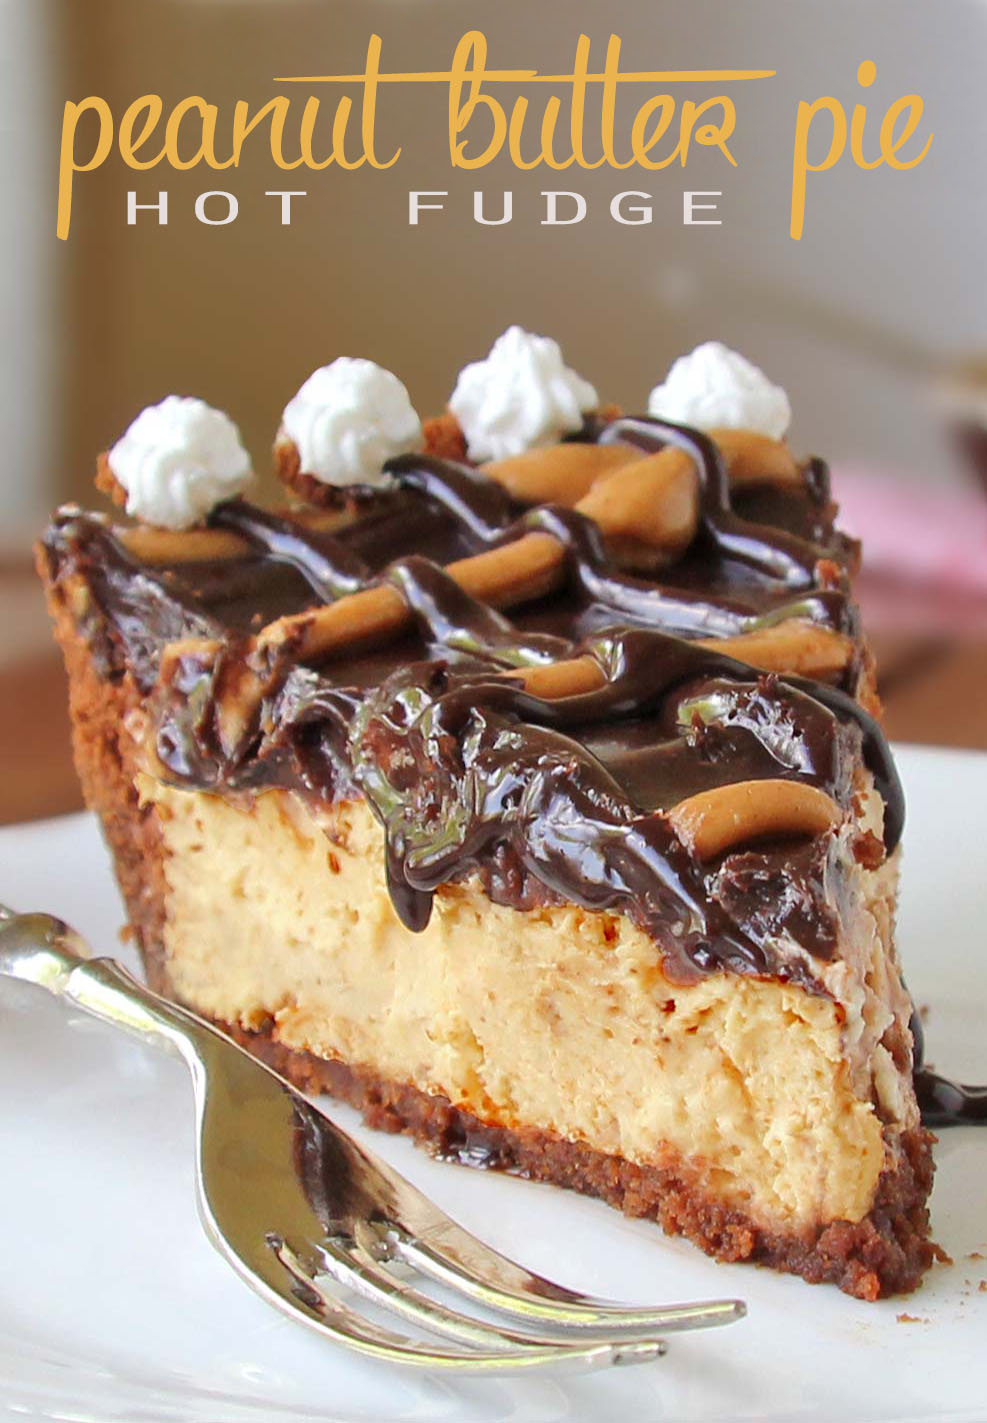 Hot Fudge Peanut Butter  Pie - It’s decadent, and peanut buttery with a perfect Hot Fudge topping and is sure to satisfy your craving for something sweet!